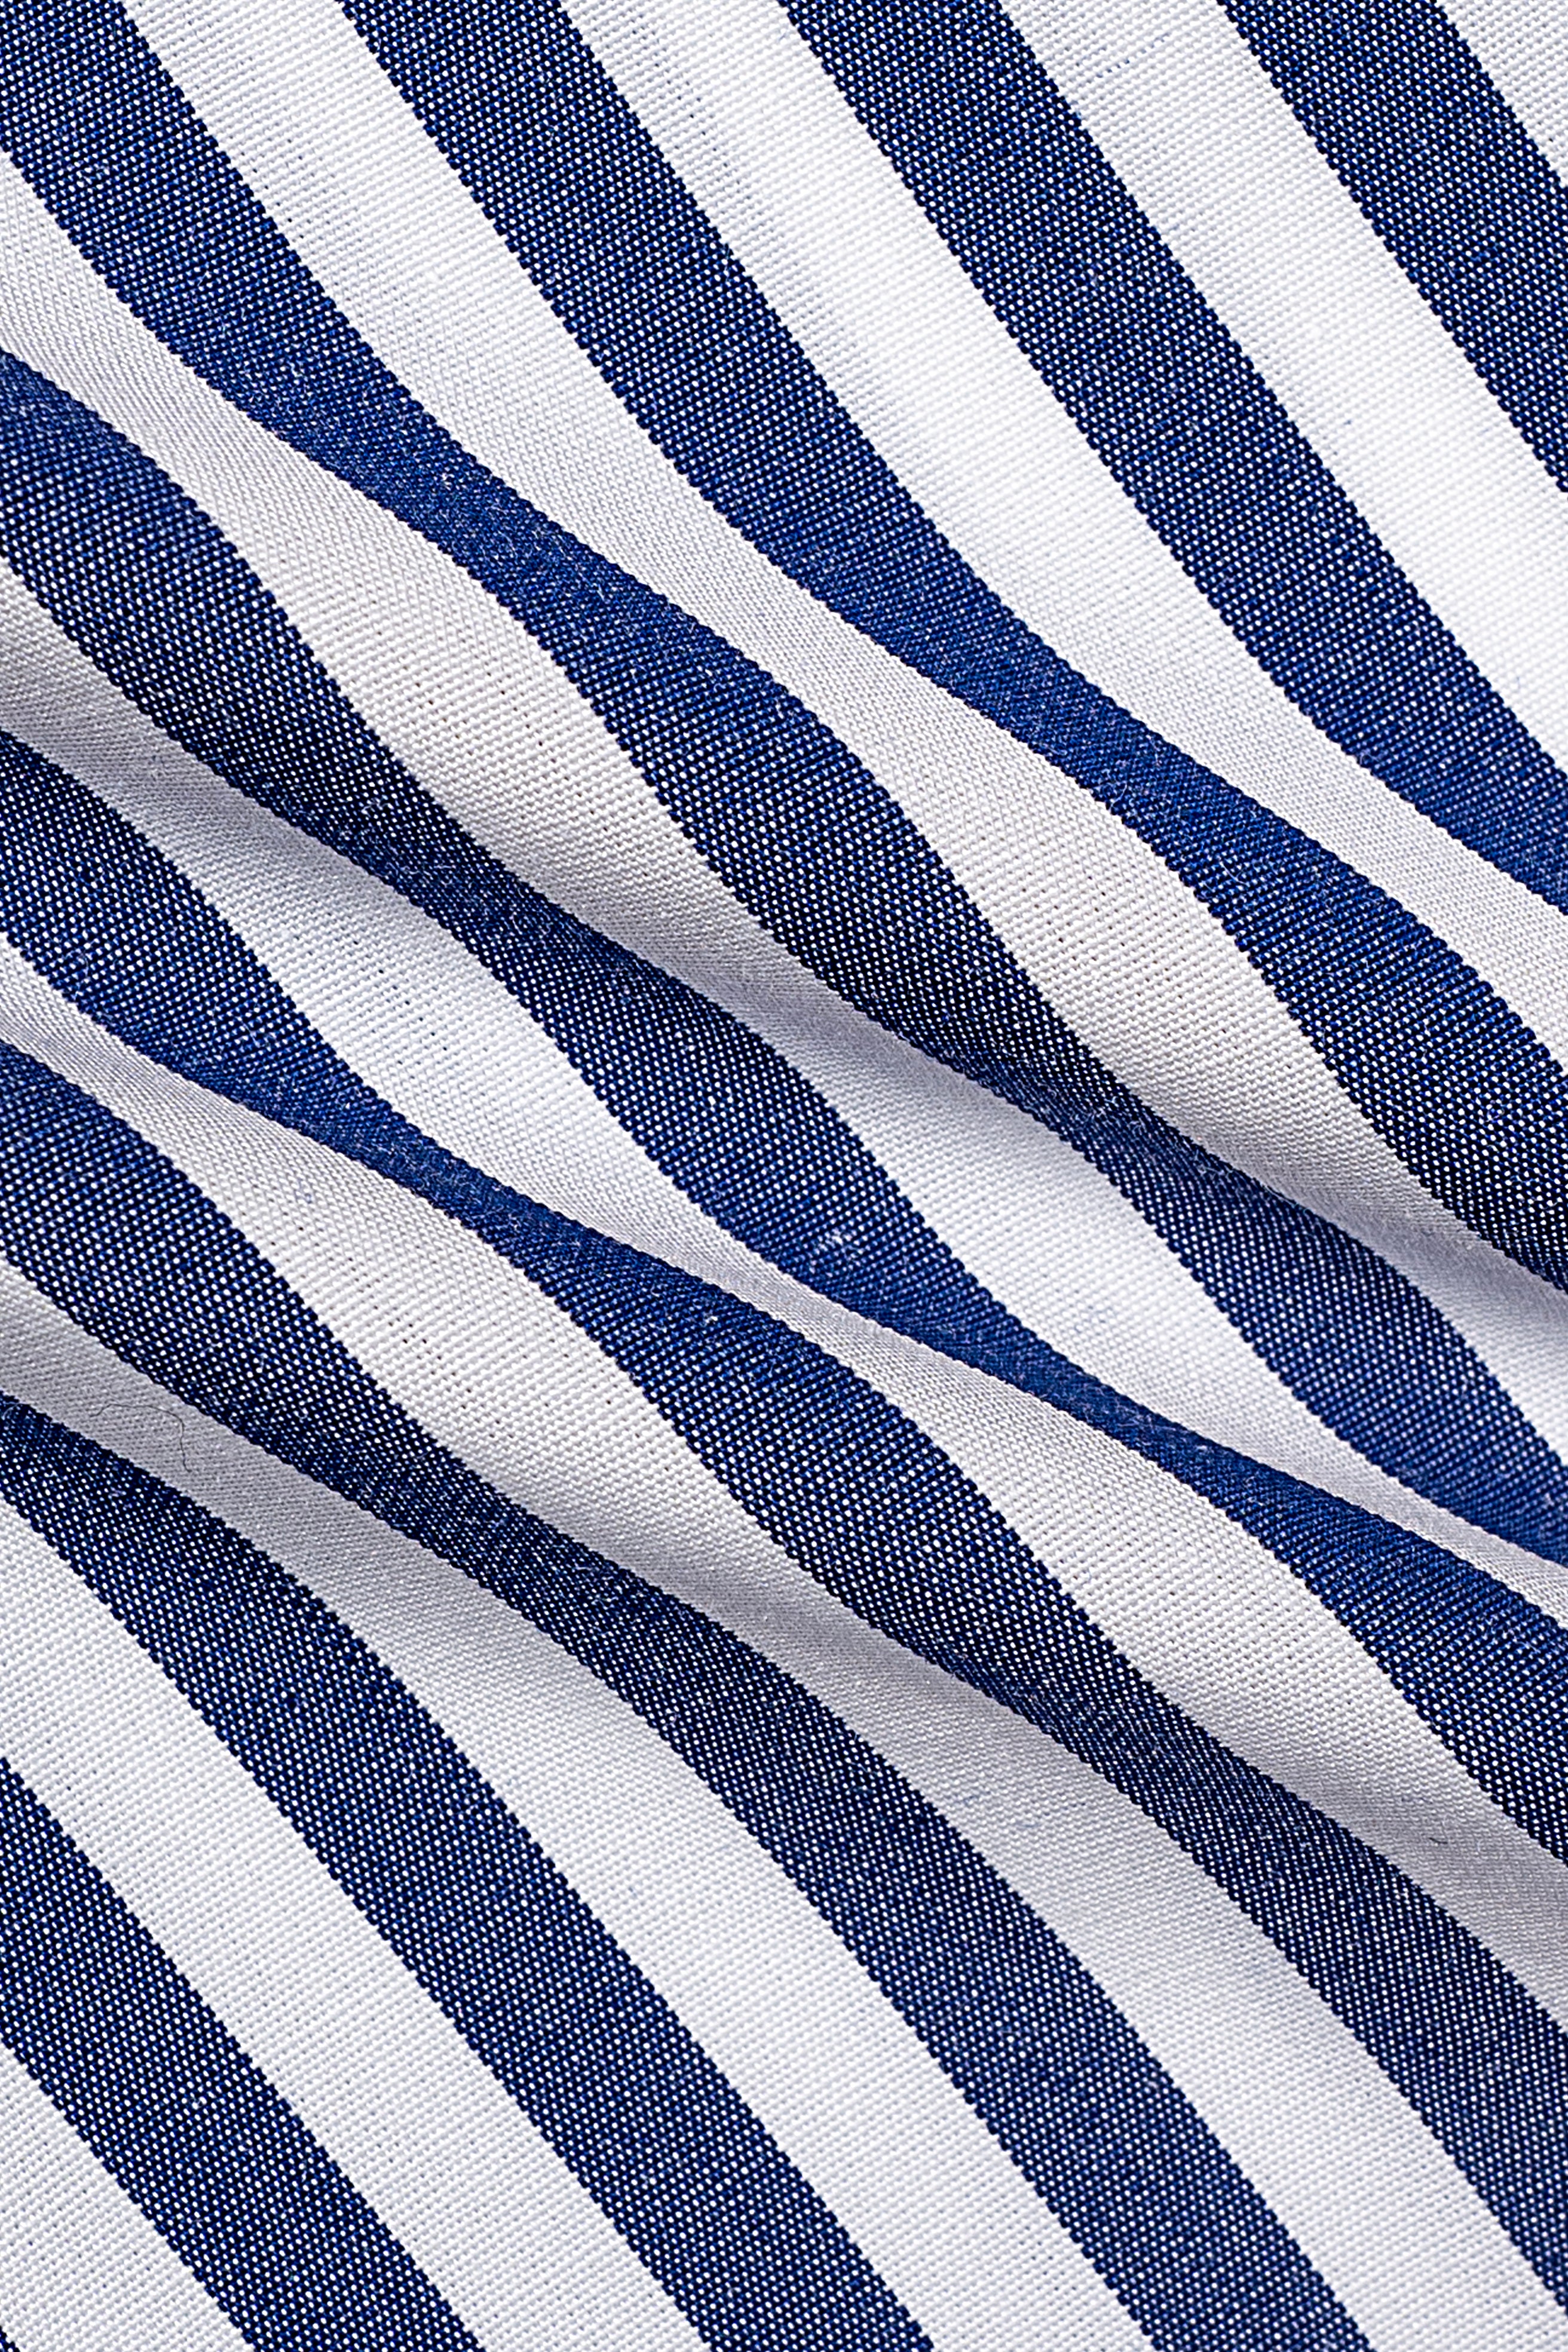 LIMITED EDITION SHIRTS BLUE WHITE STRIPES